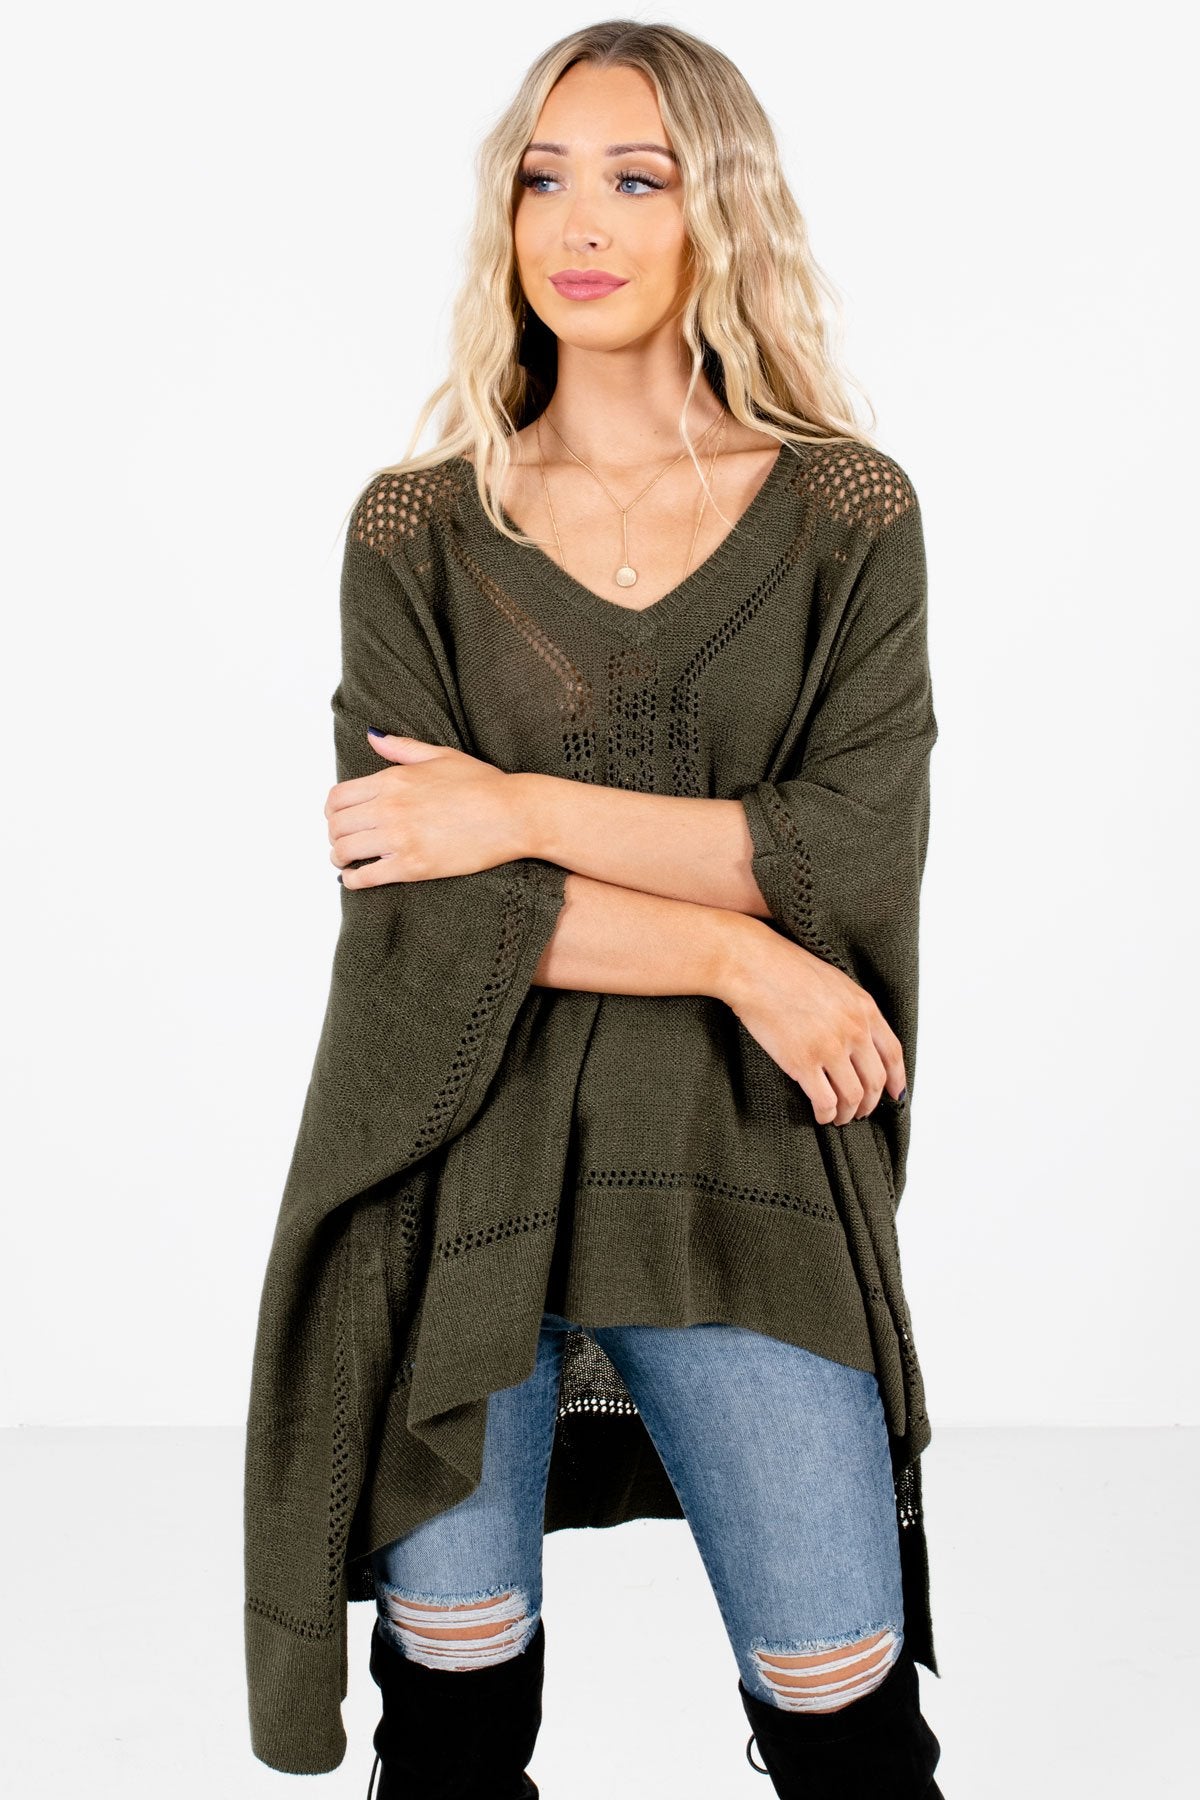 Women’s Olive Green Warm and Cozy Boutique Poncho